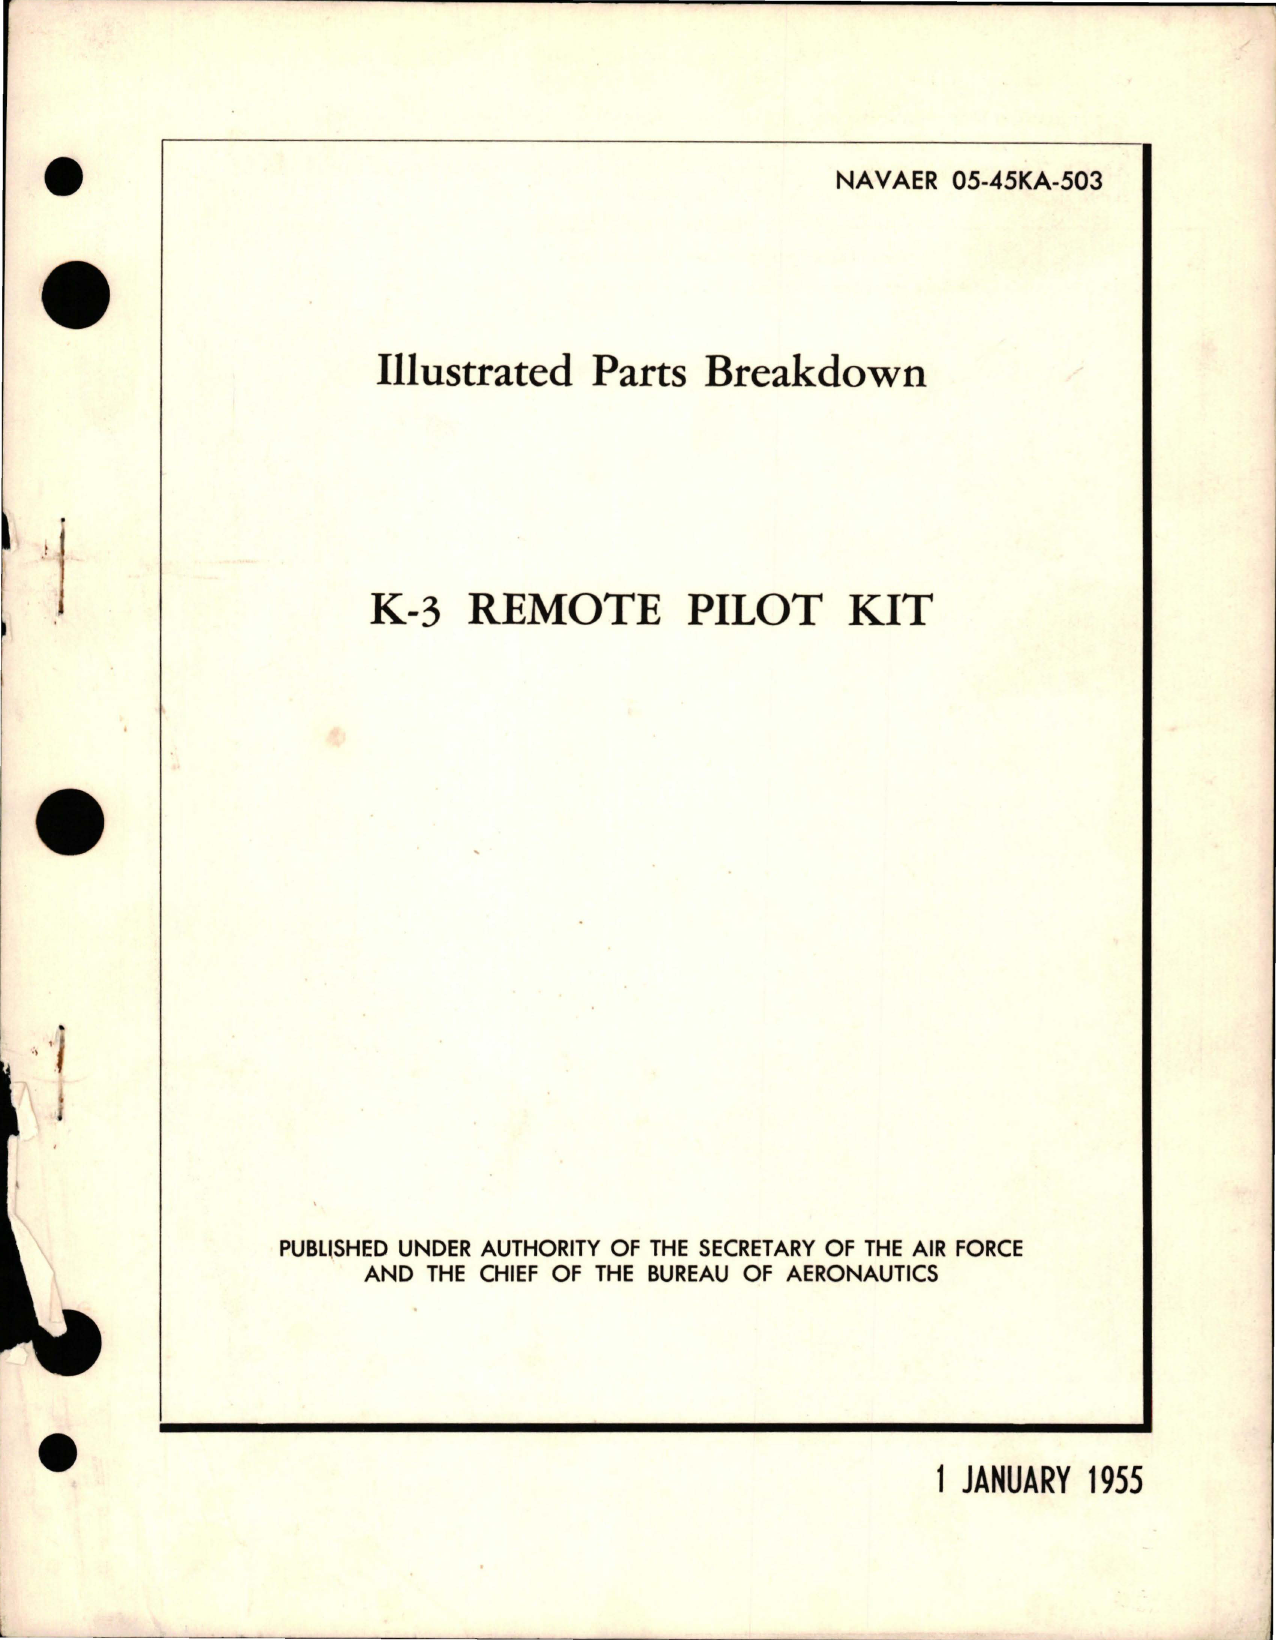 Sample page 1 from AirCorps Library document: Illustrated Parts Breakdown for K-3 Remote Pilot Kit